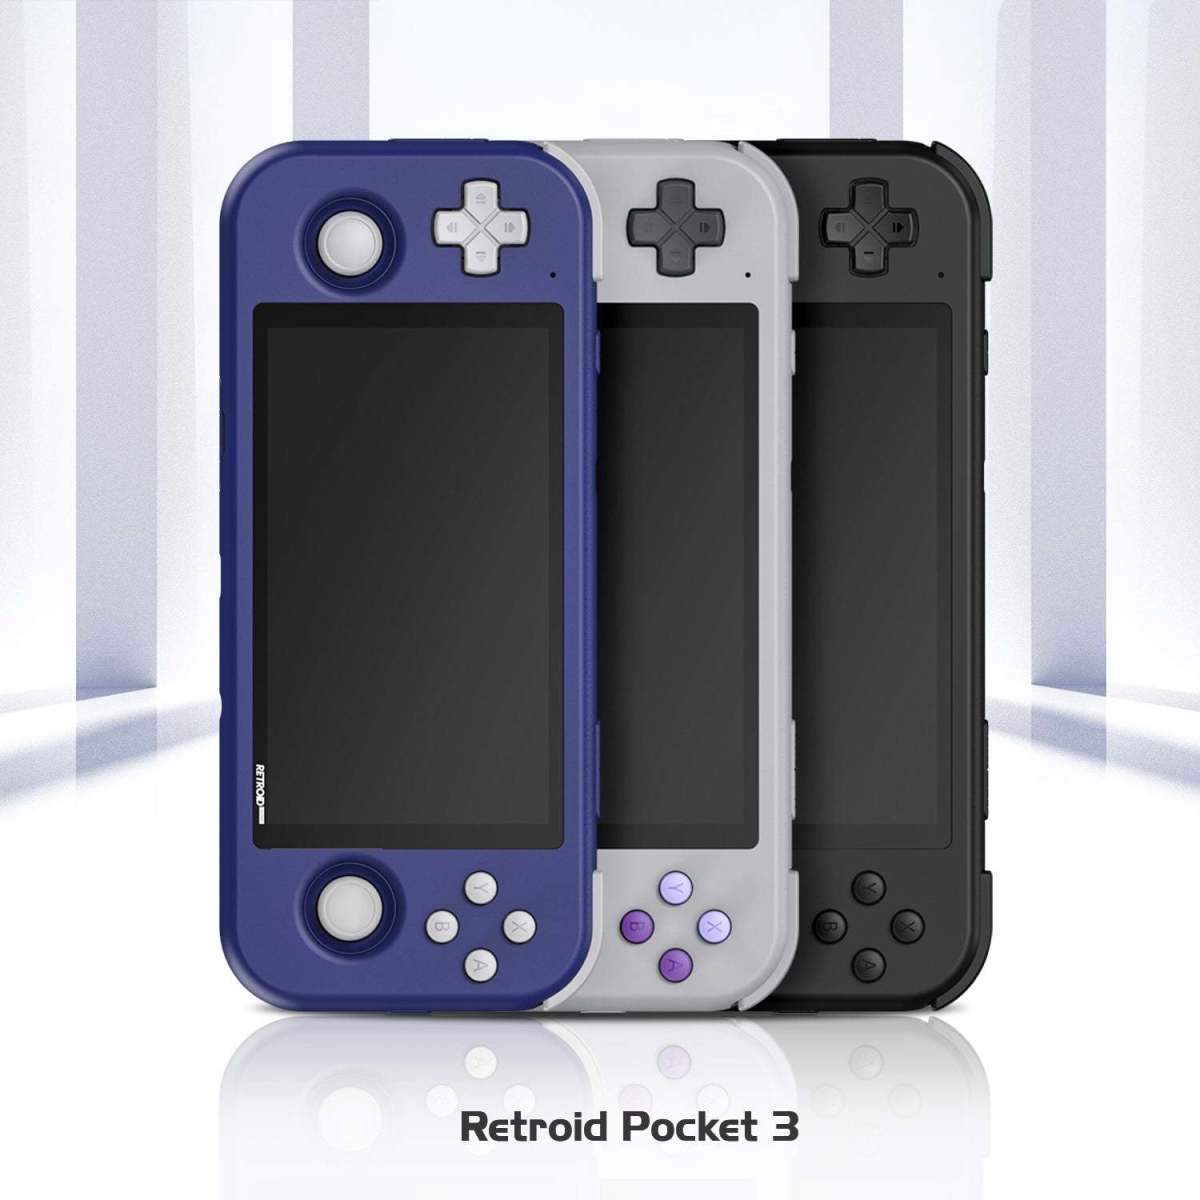 Retroid Pocket 3 / 3+ Review - Should You Buy It?